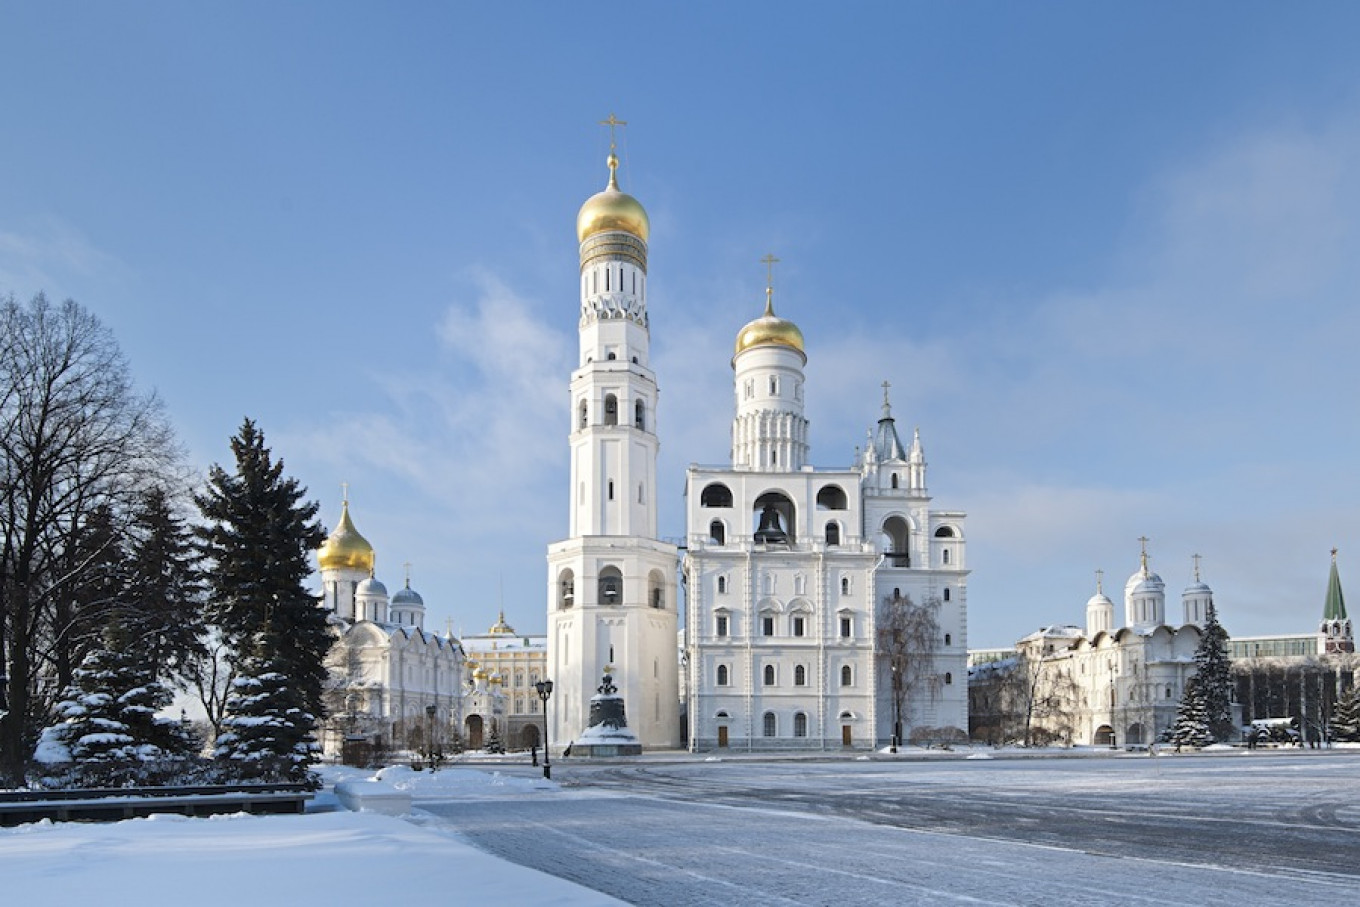 
					The Ivan the Great Bell Tower was once the tallest building in Moscow and stands proudly in the Kremlin complex during winter					 					Kremlin Museum				